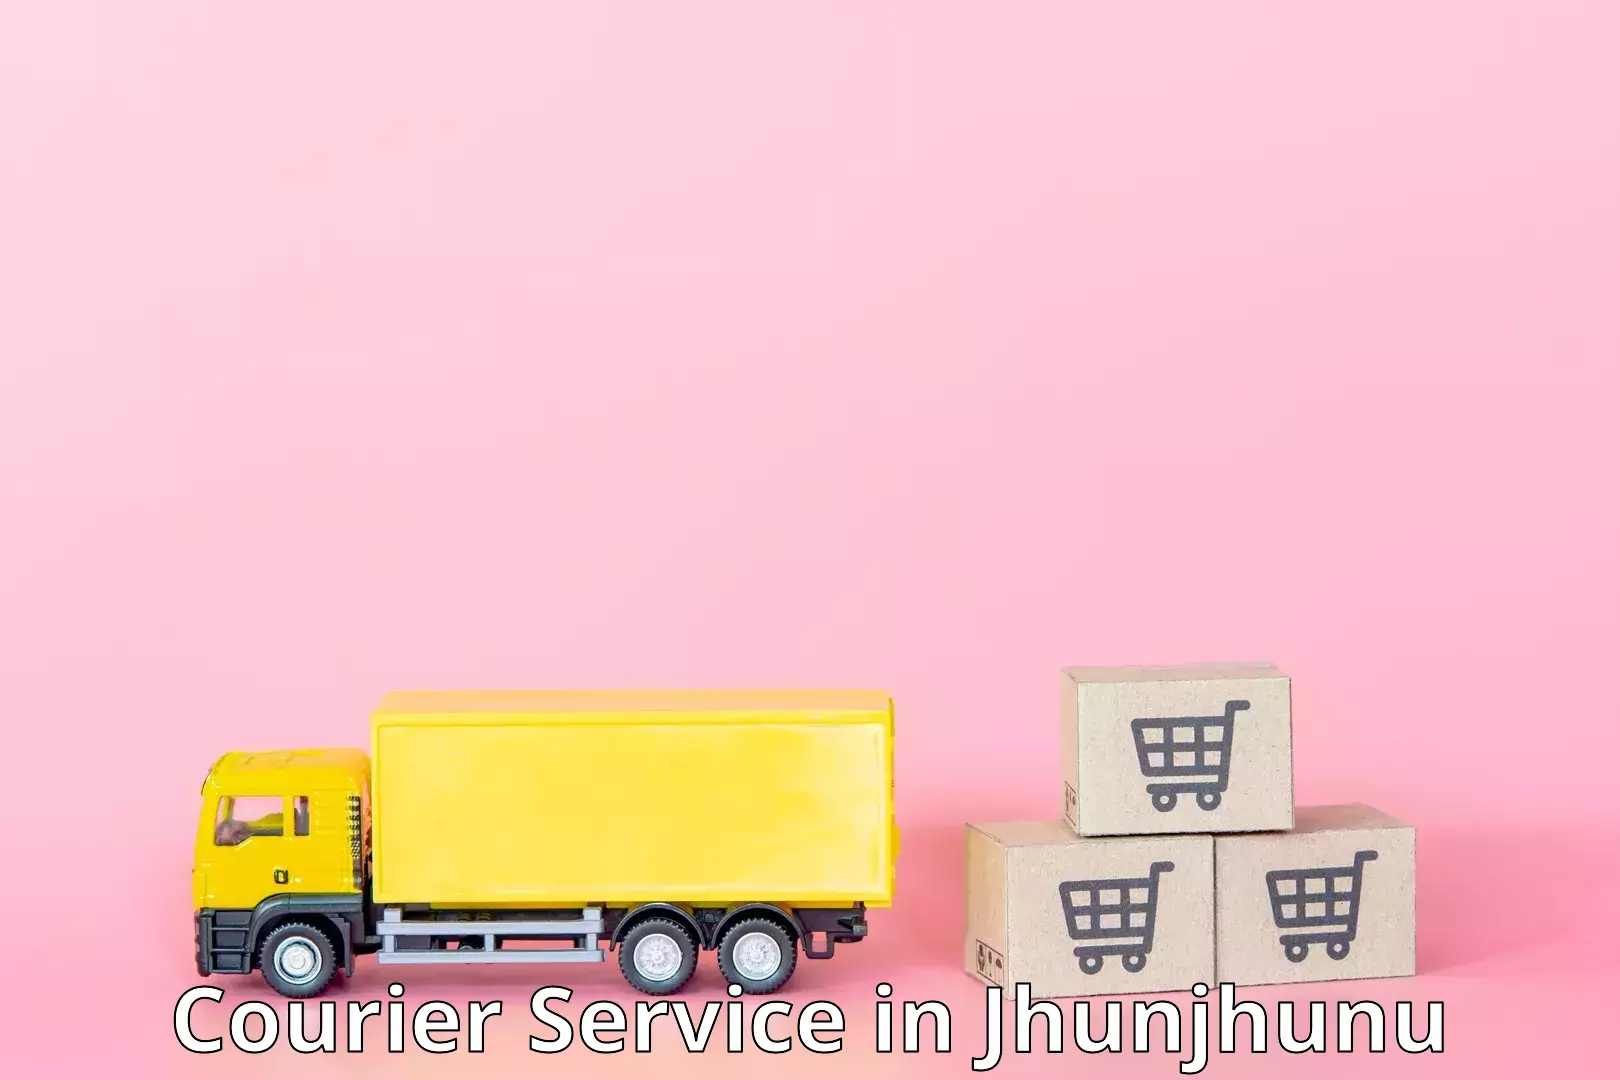 Medical delivery services in Jhunjhunu